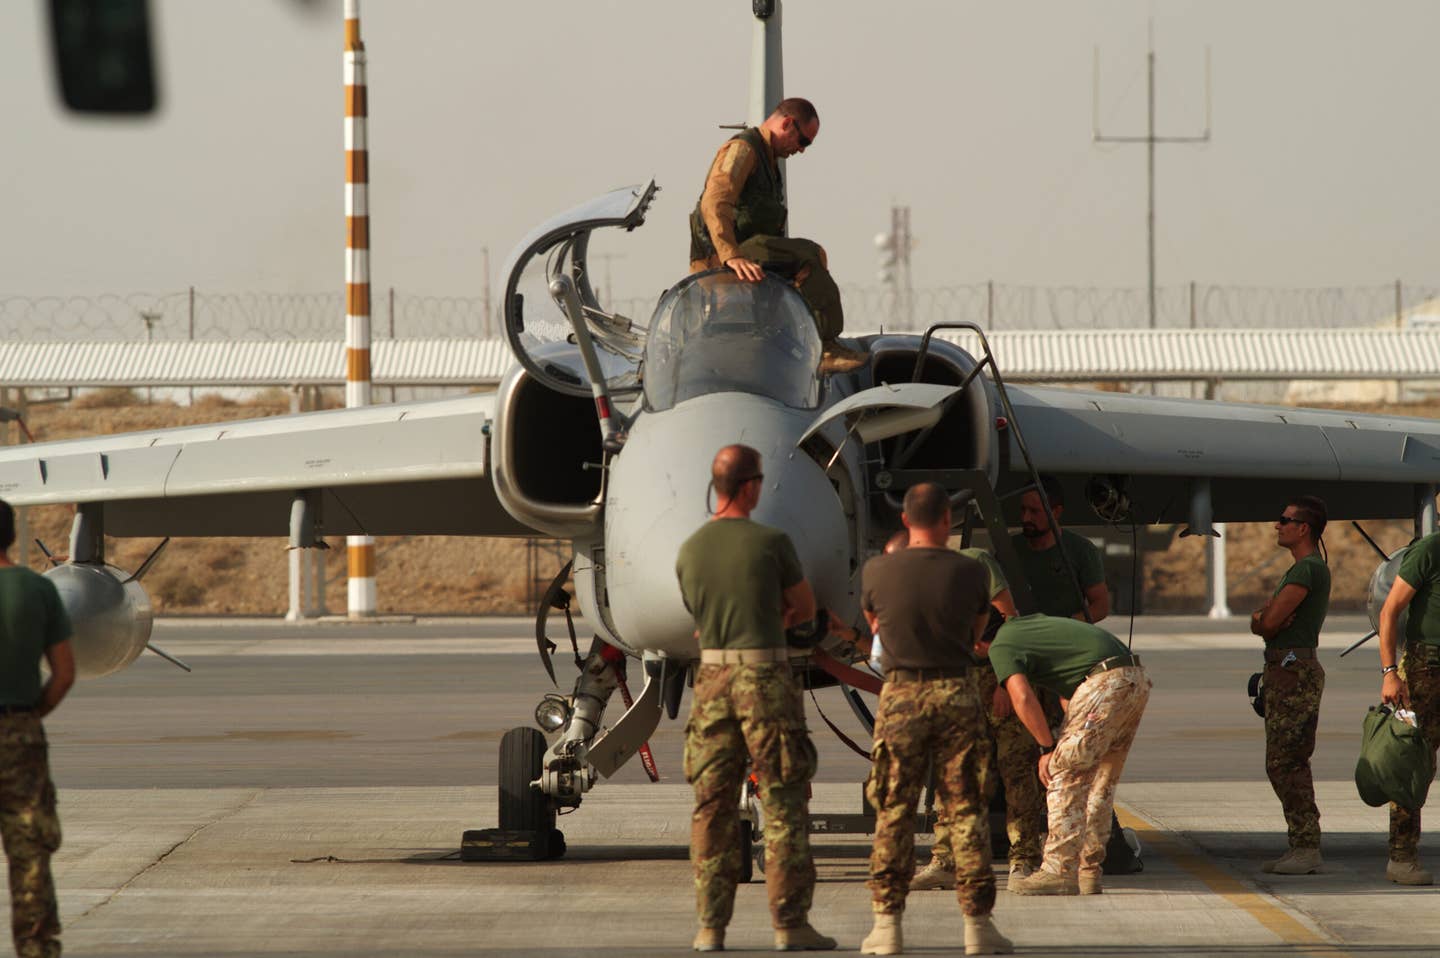 An Italian Air Force AMX after landing at Camp Arena in Herat, Afghanistan, on September 1, 2010. <em>Photo by Enzo Signorelli/Getty Images</em>